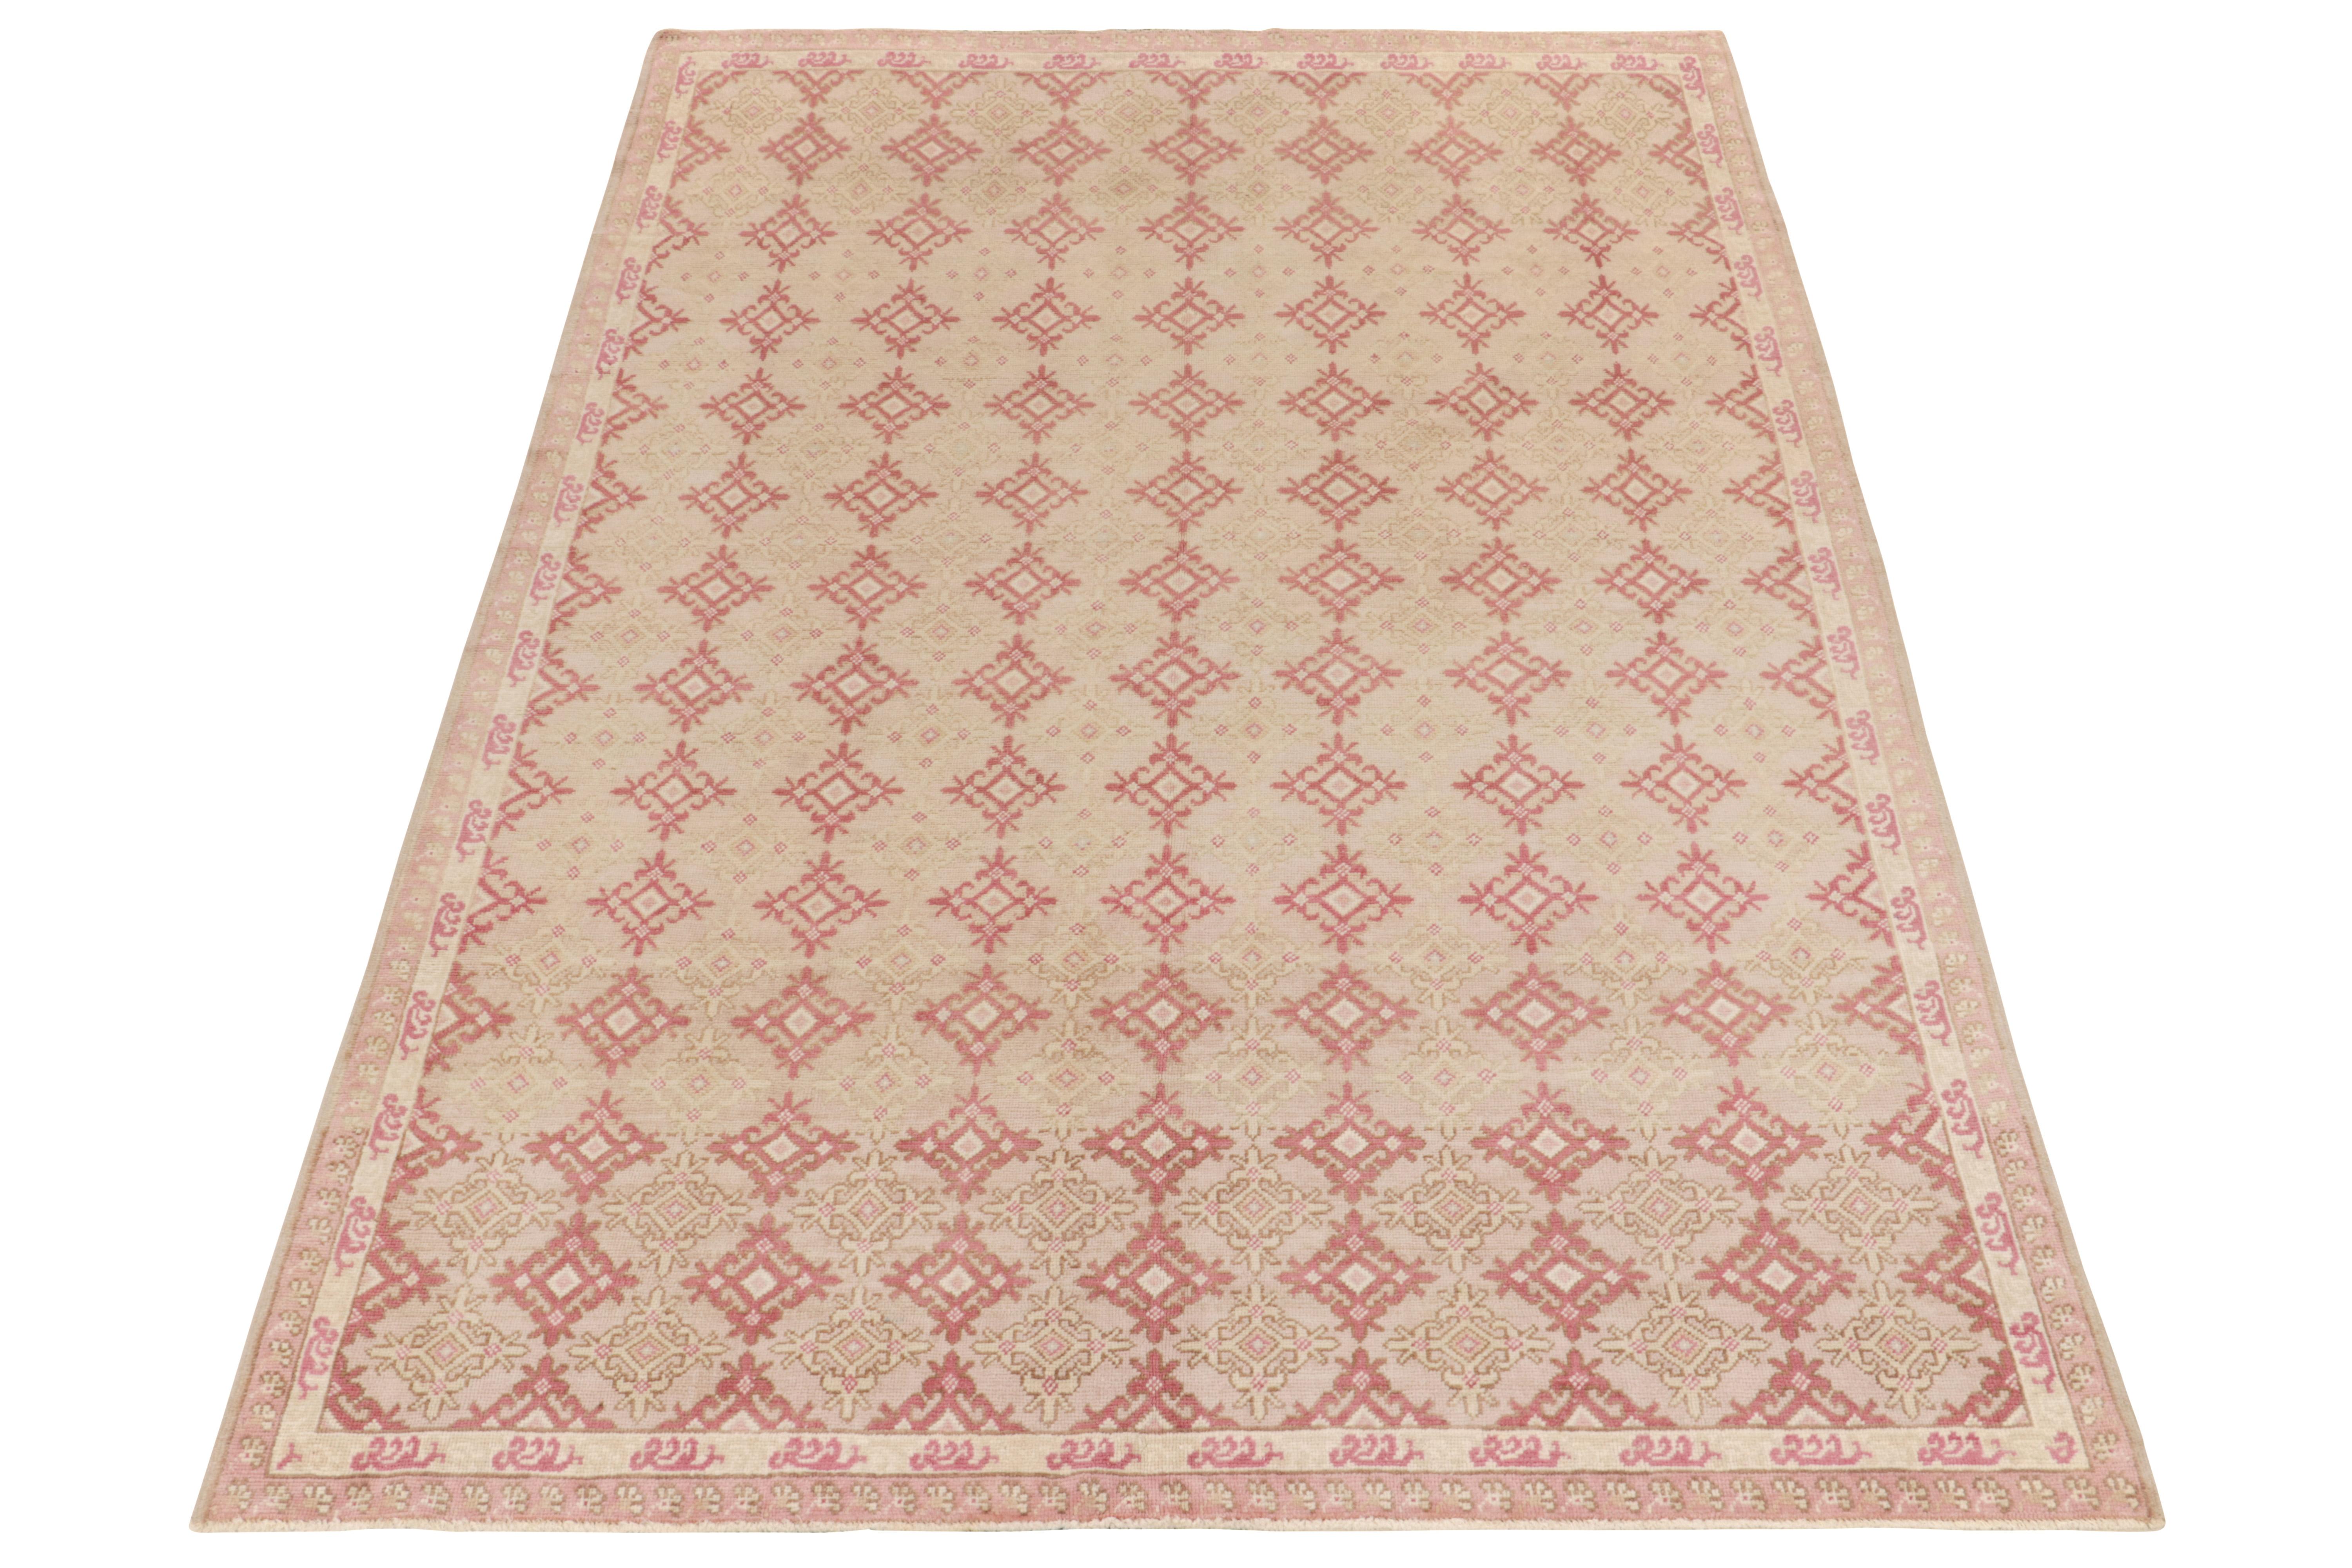 A vintage 7x10 mid-century rug from the Mid-Century Pasha Collection by Rug & Kilim—commemorating the works of a unique multi-disciplinary Turkish artist. 

Hand knotted in wool, the rug enjoys softness & elegance of white, dainty pink & red tones